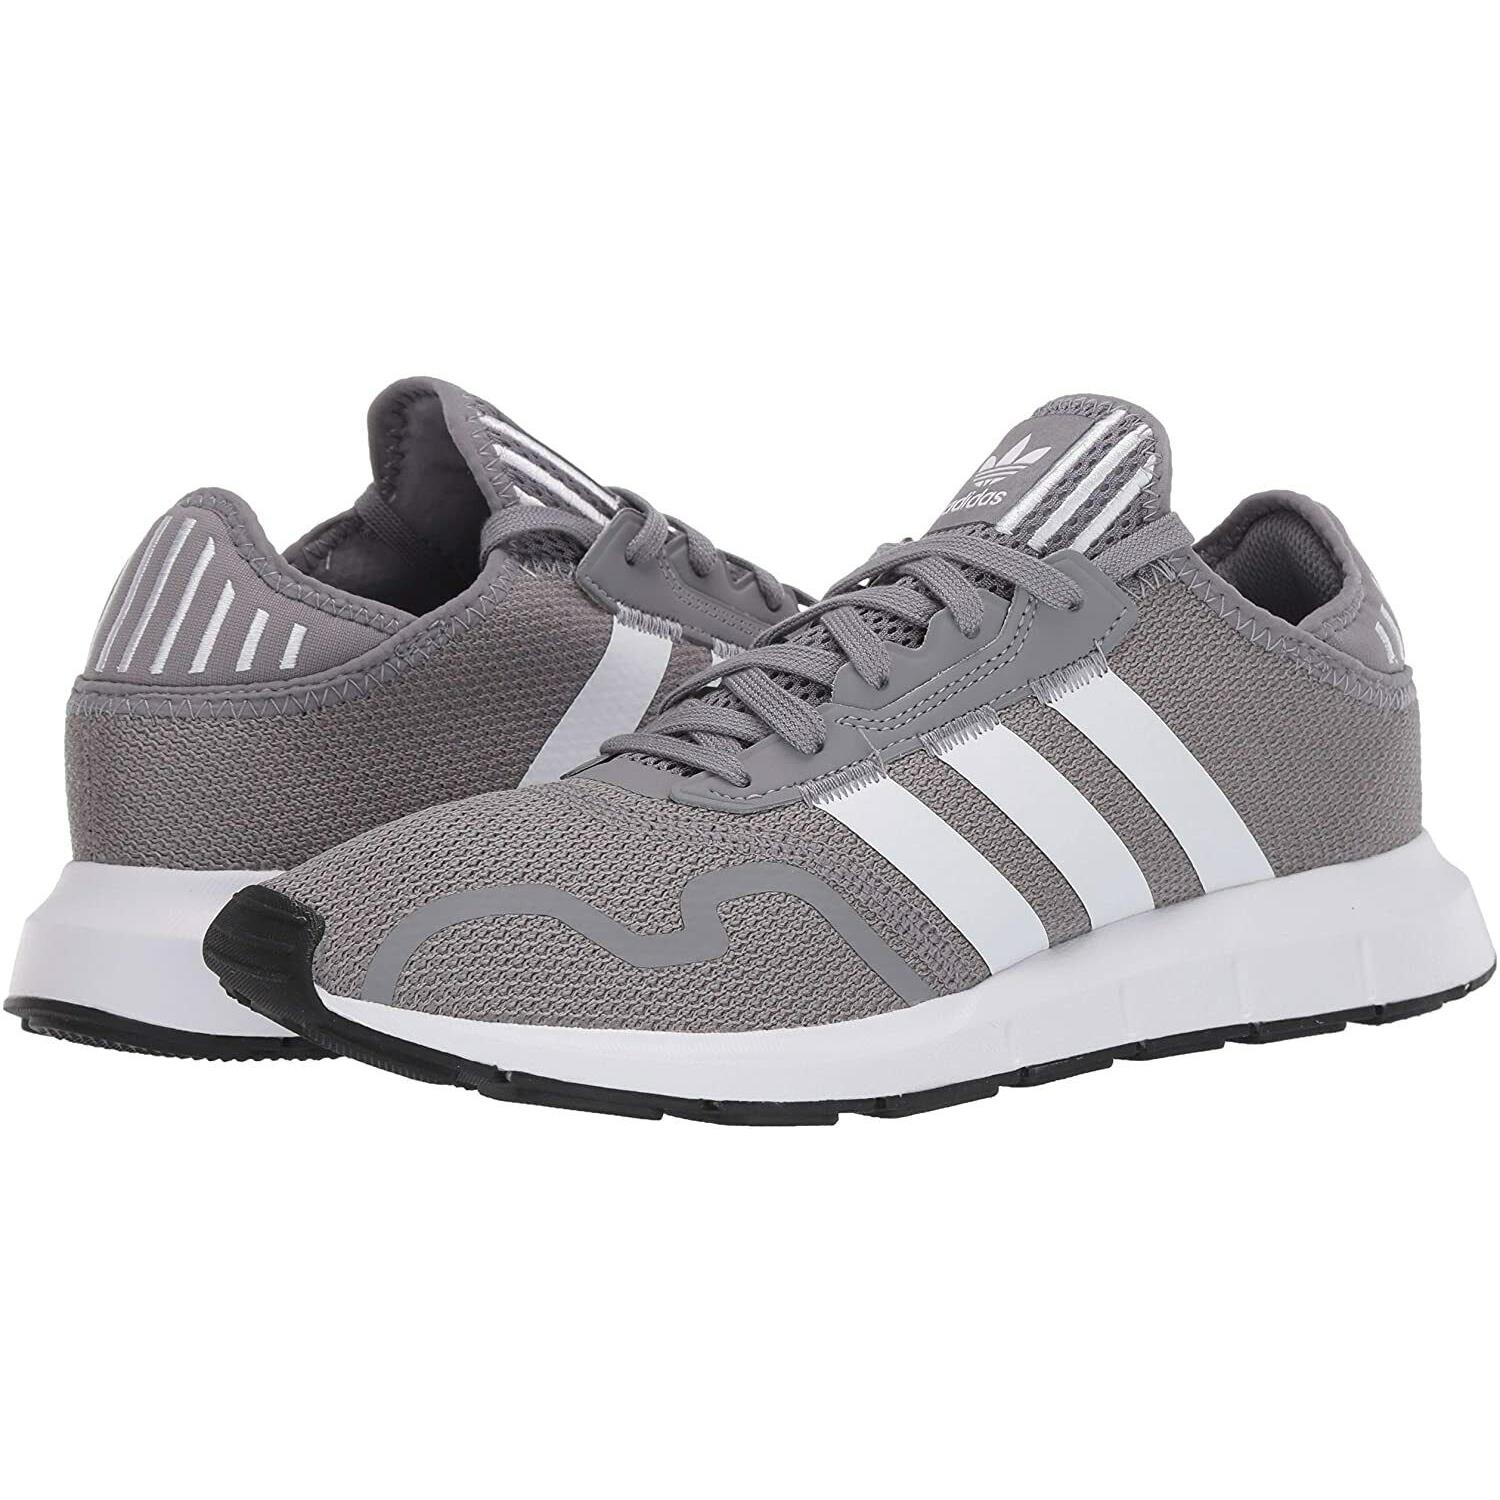 Men`s Shoes Adidas Swift Run X Casual Athletic Sneakers FY2114 Grey White